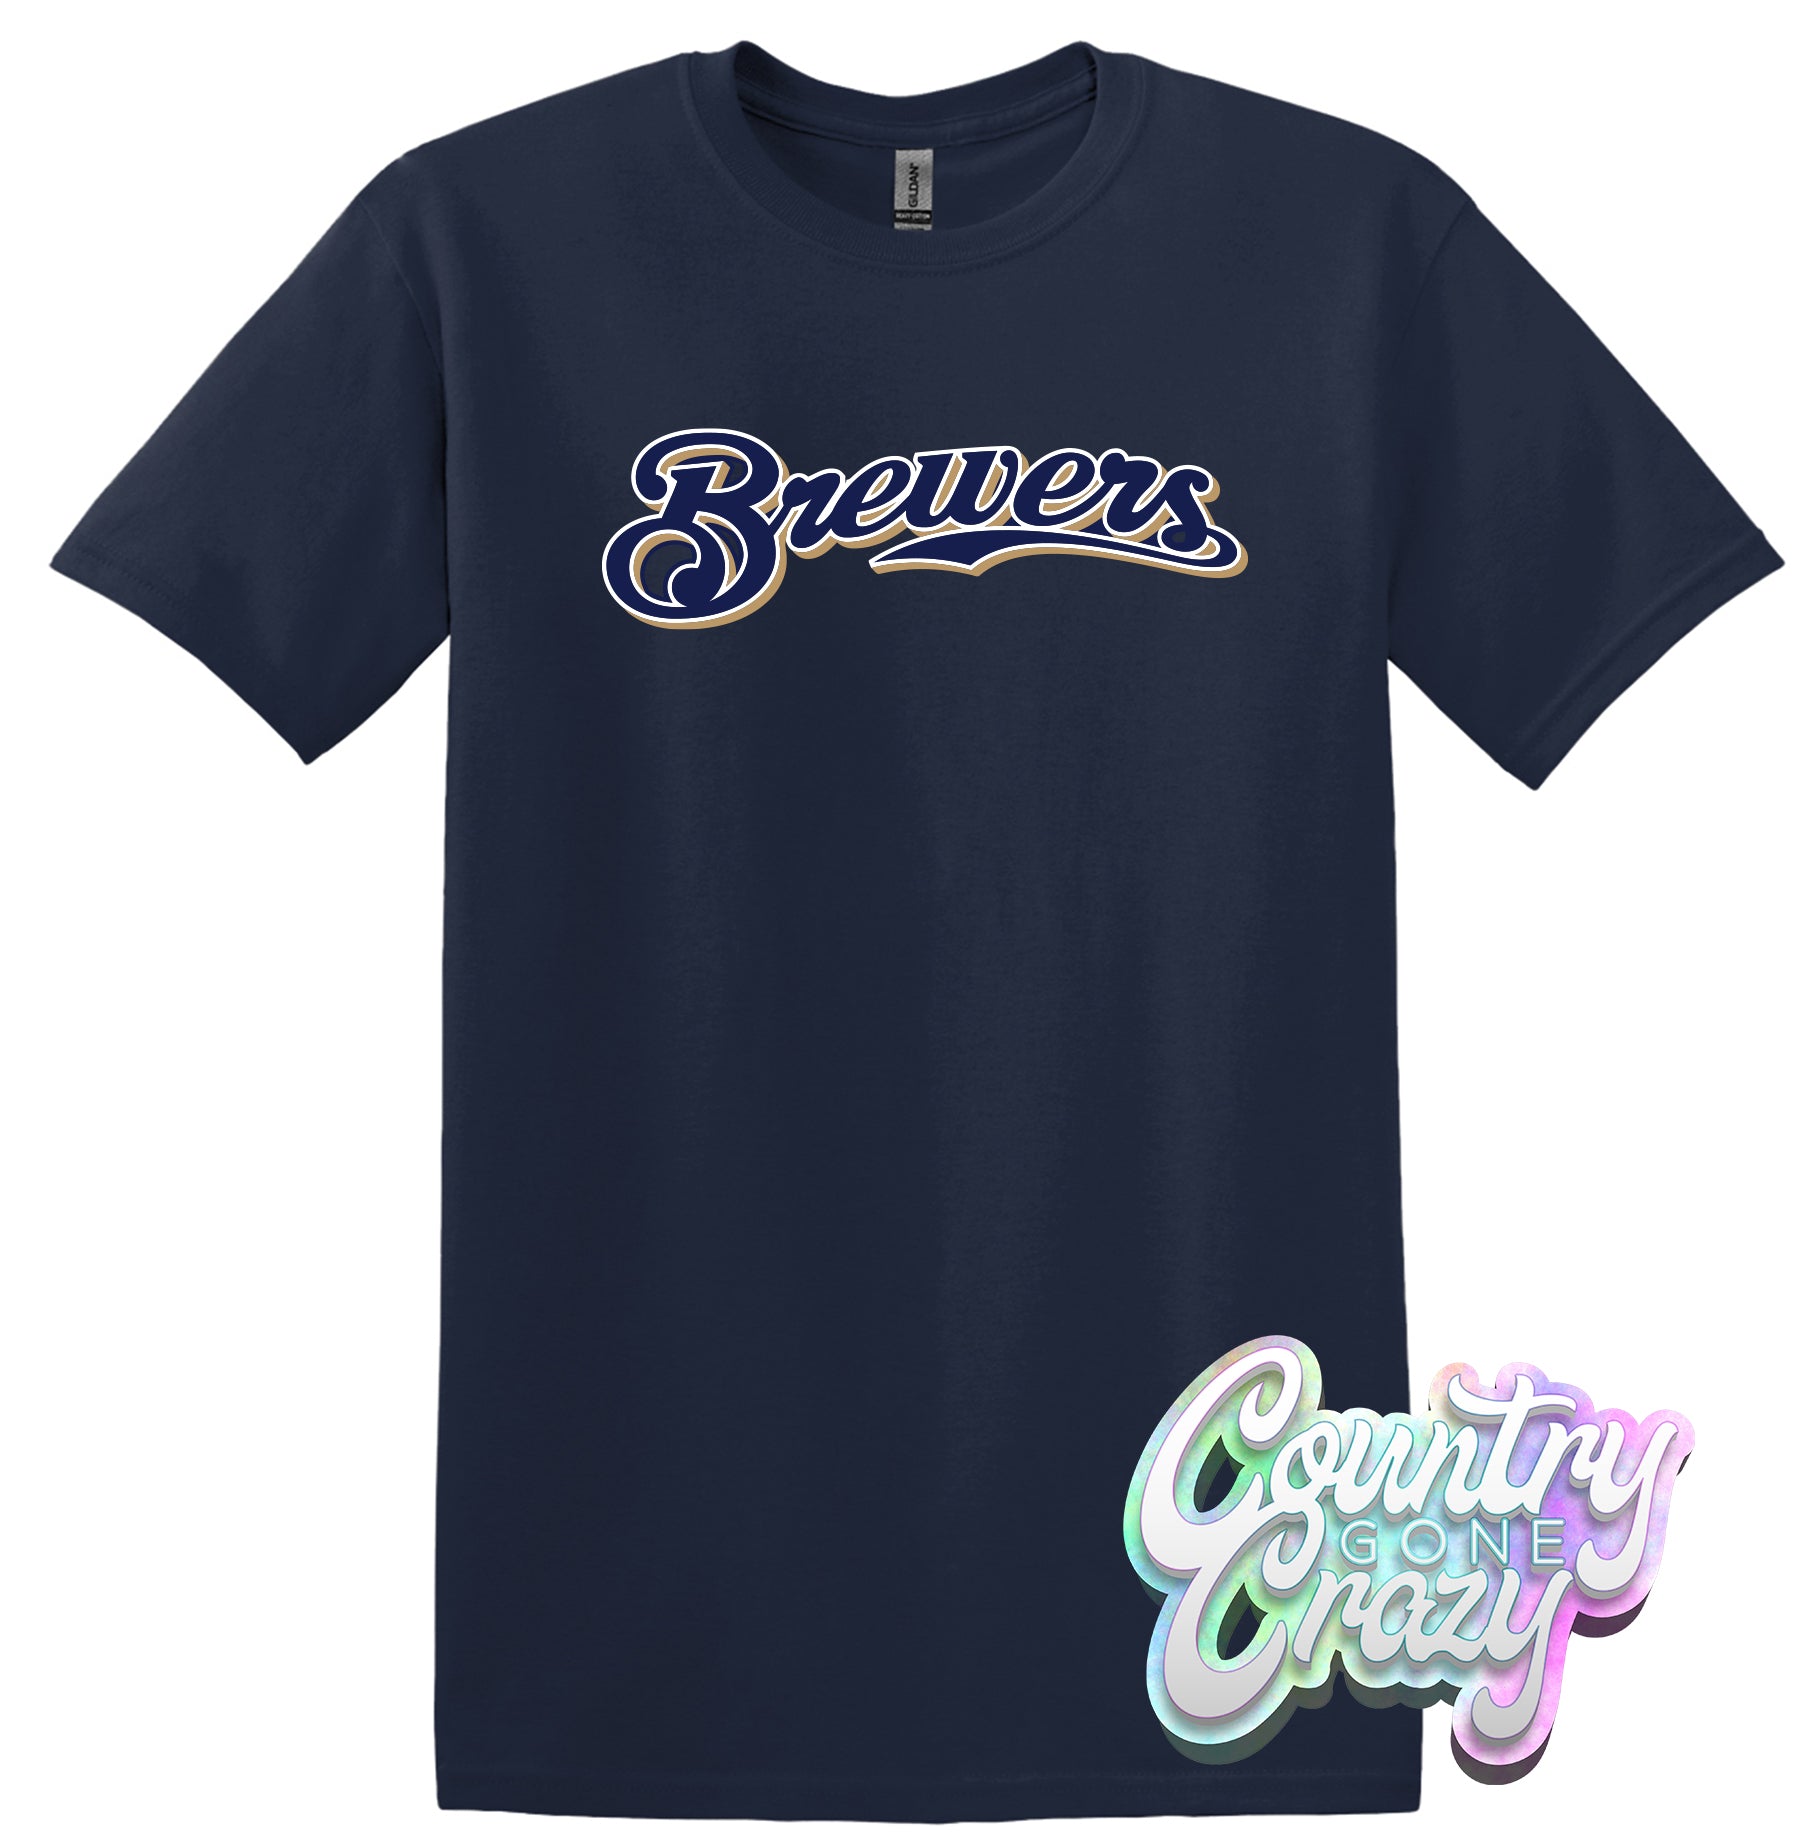  Brewers Shirts